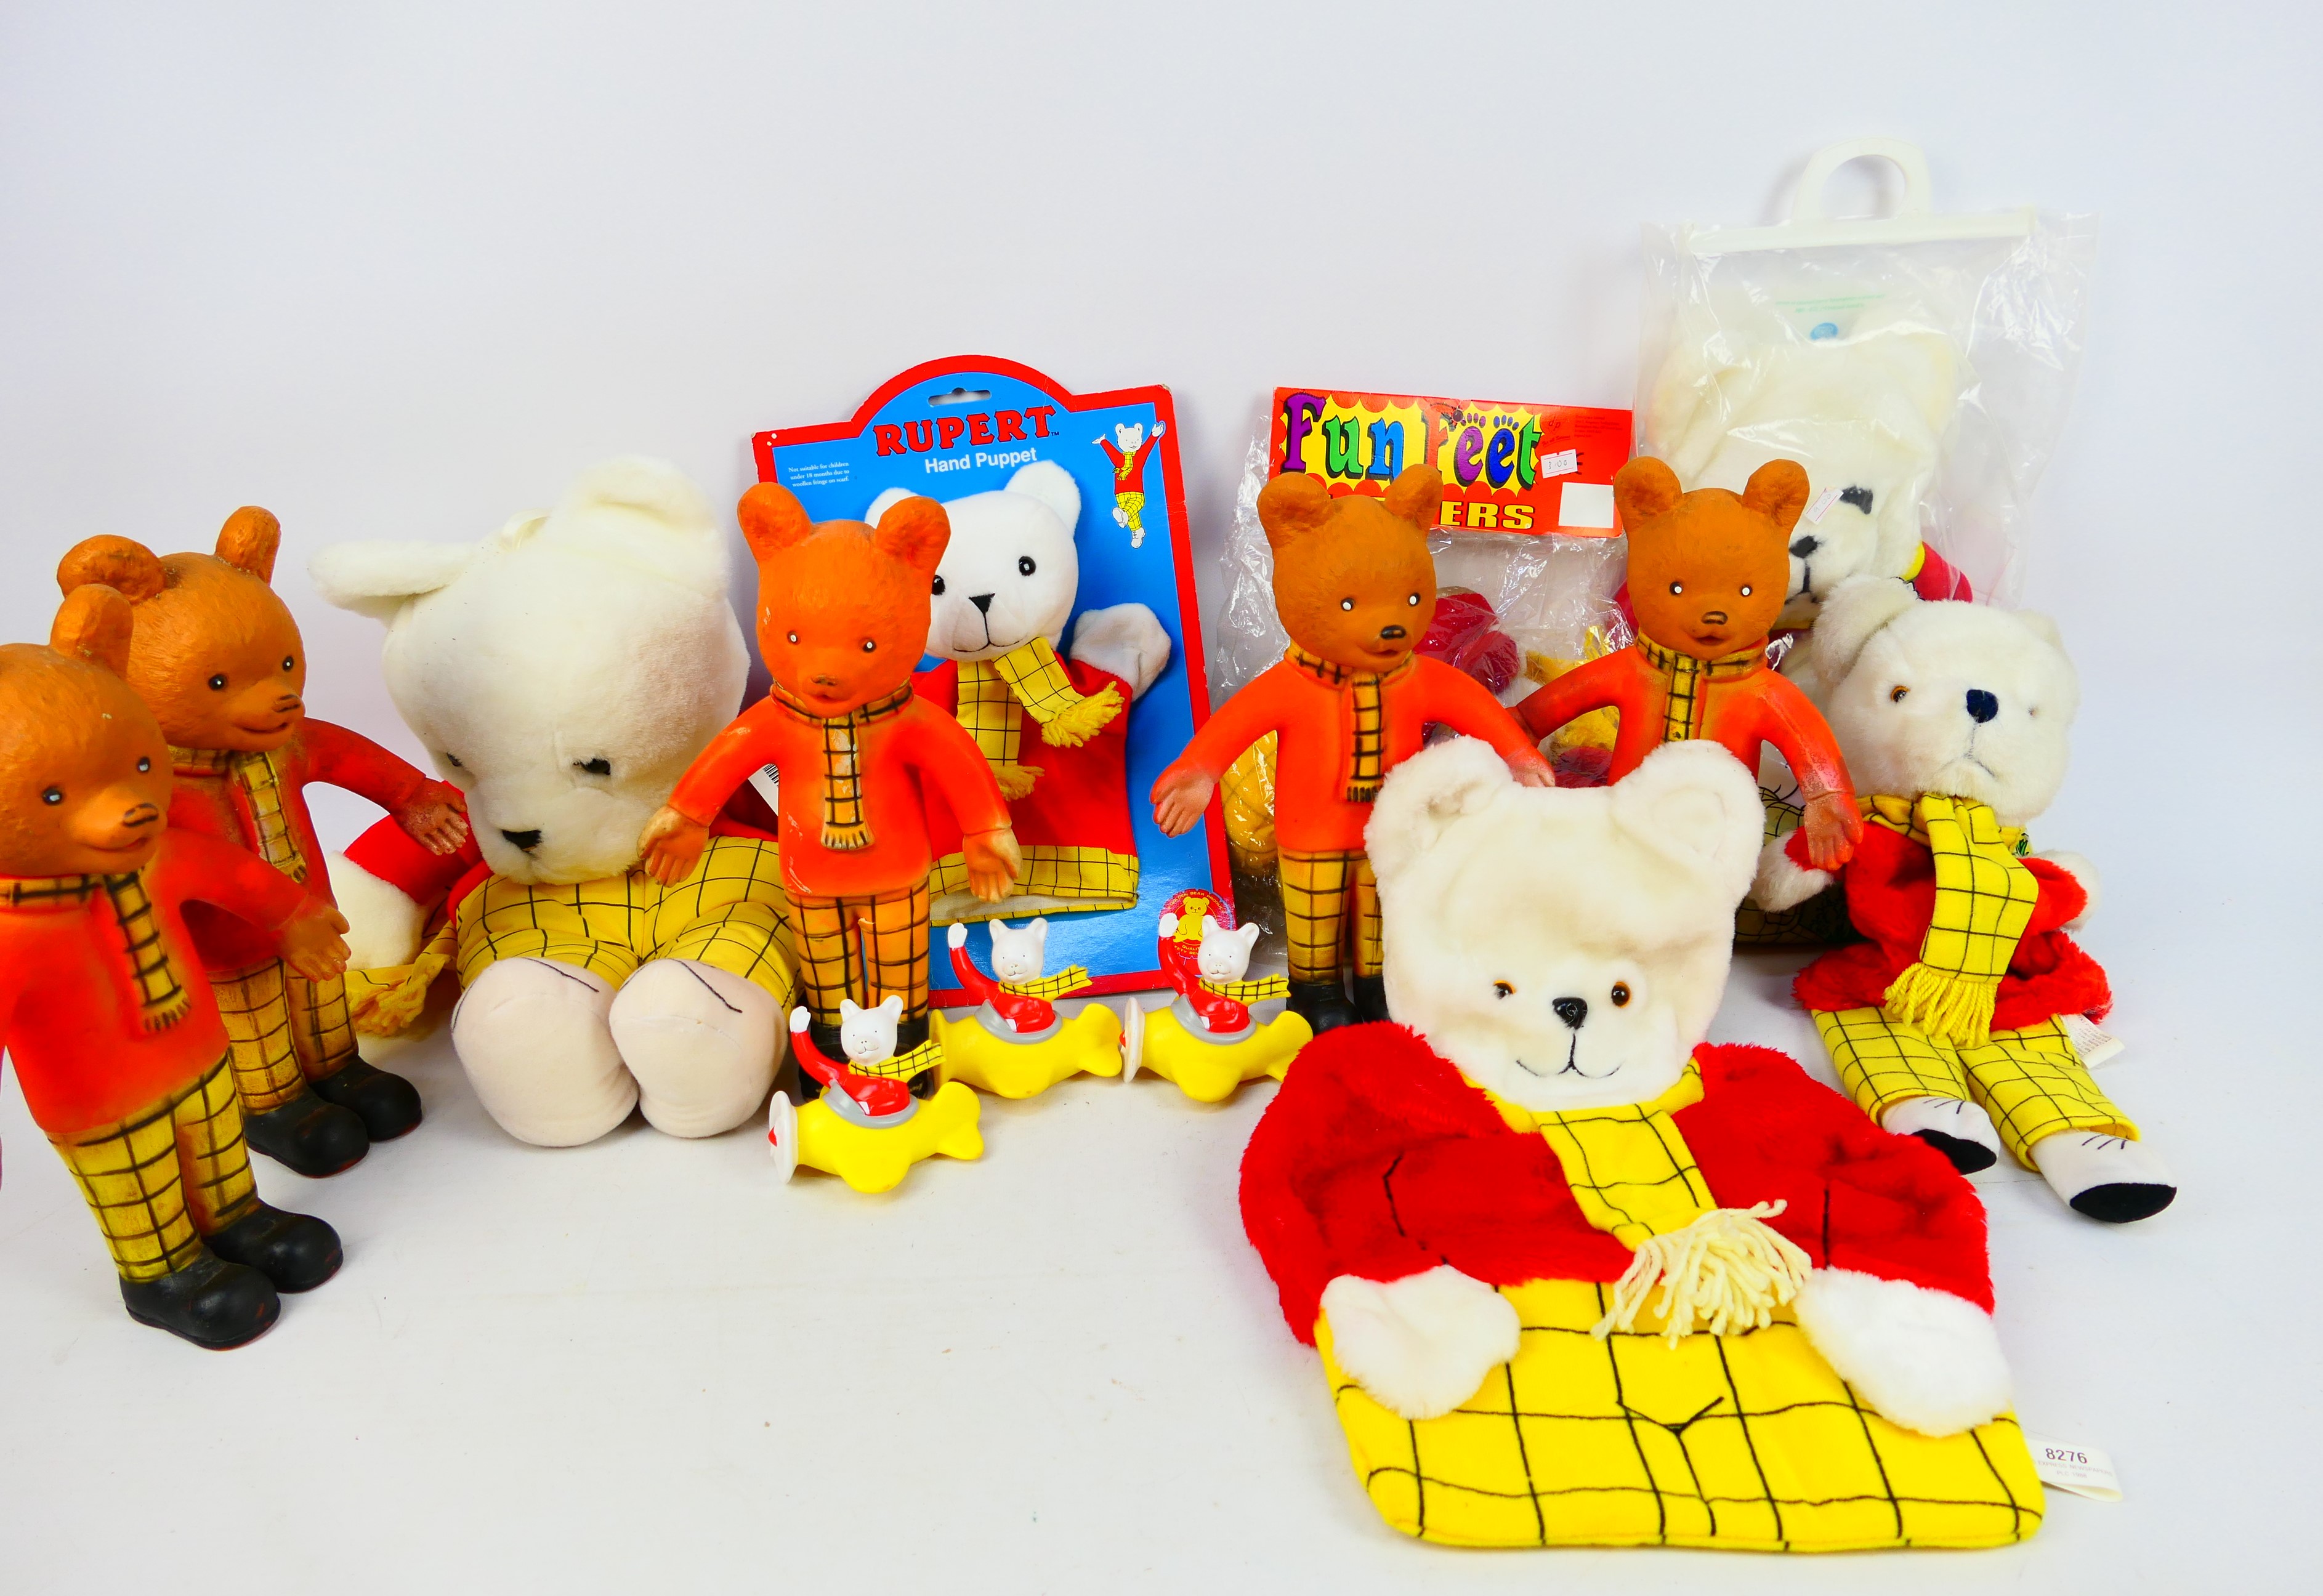 Golden Bear - Boots - Others - A group of Rupert the Bear themed toys, and novelty items,